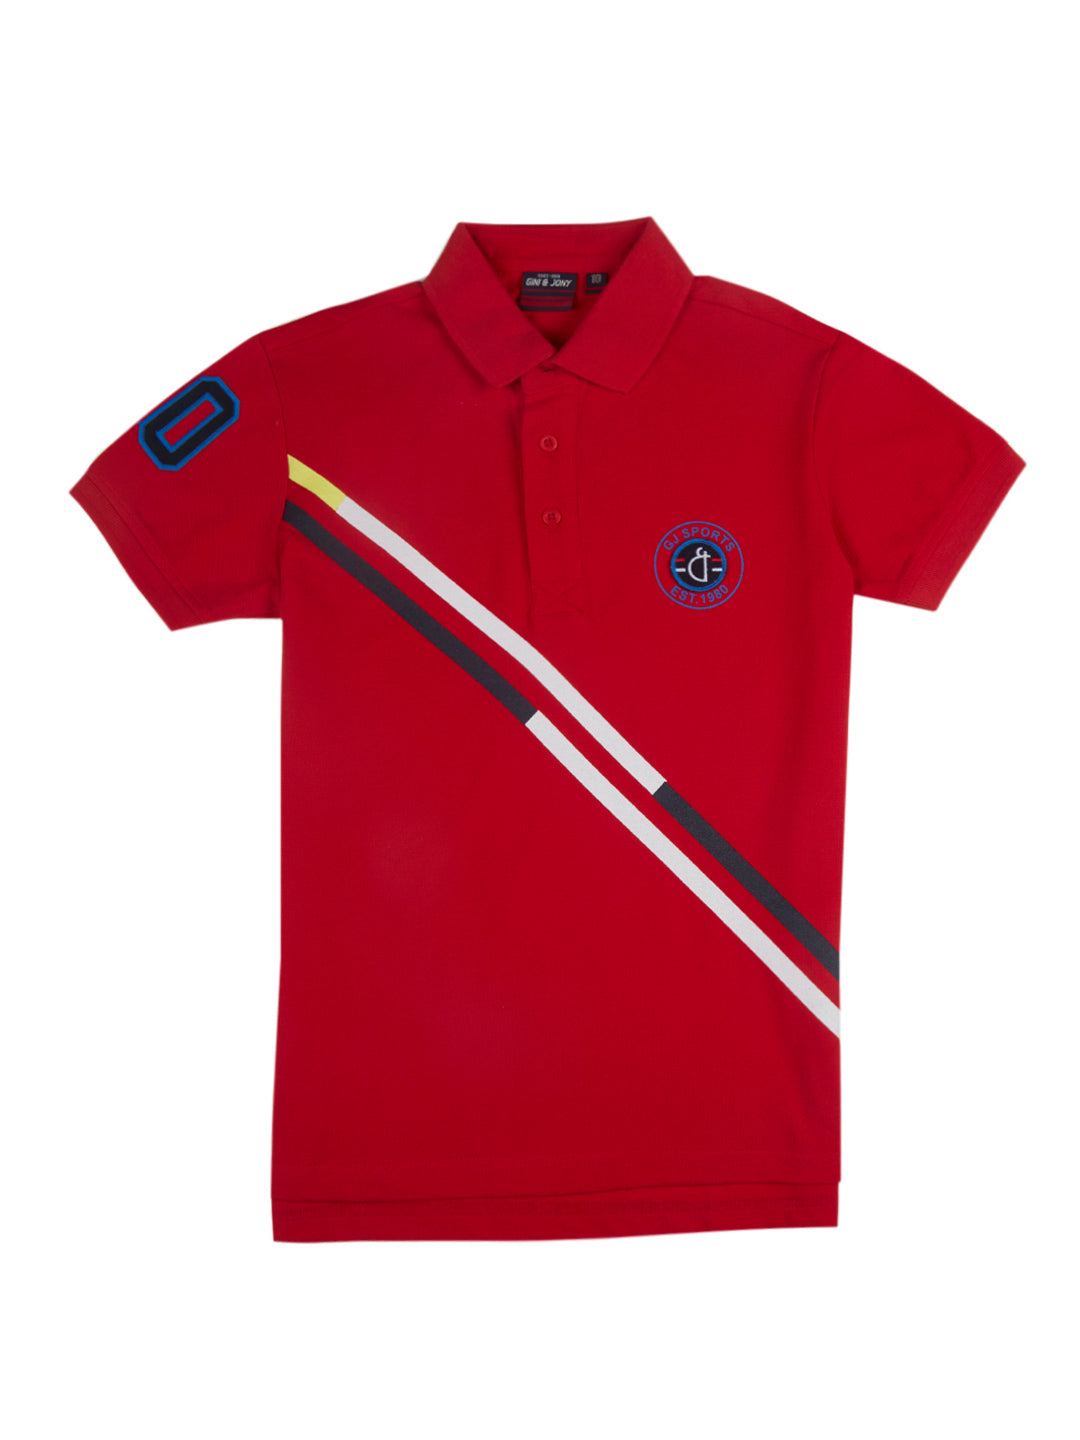 Boys Red Applique Knits Polo T-Shirt